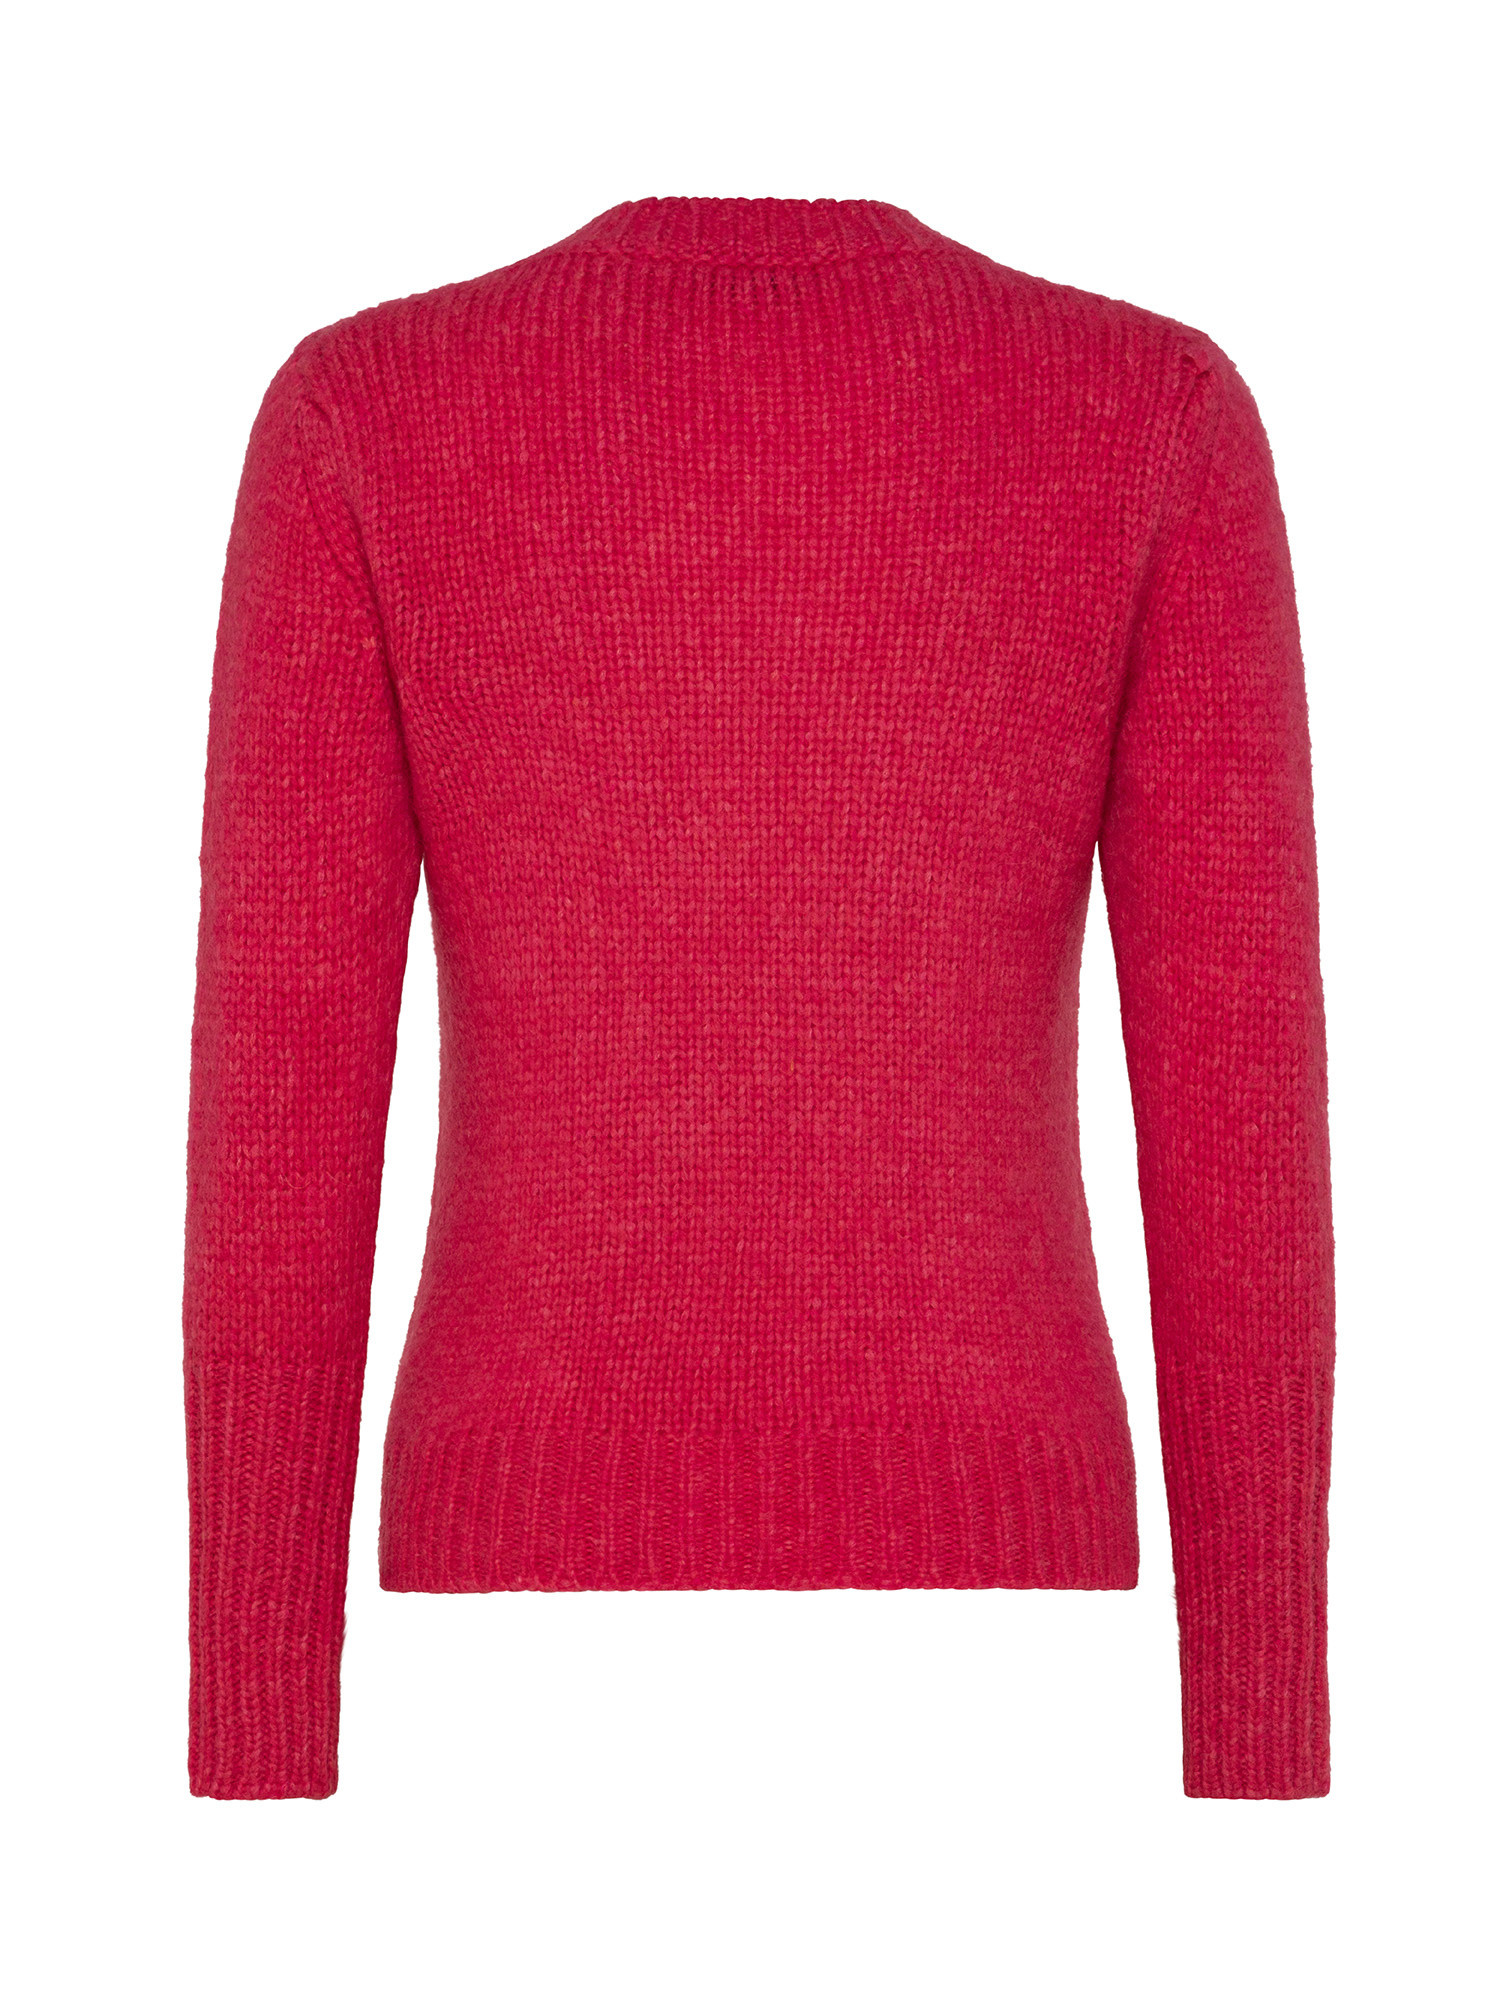 K Collection - Crewneck sweater, Pink Fuchsia, large image number 1